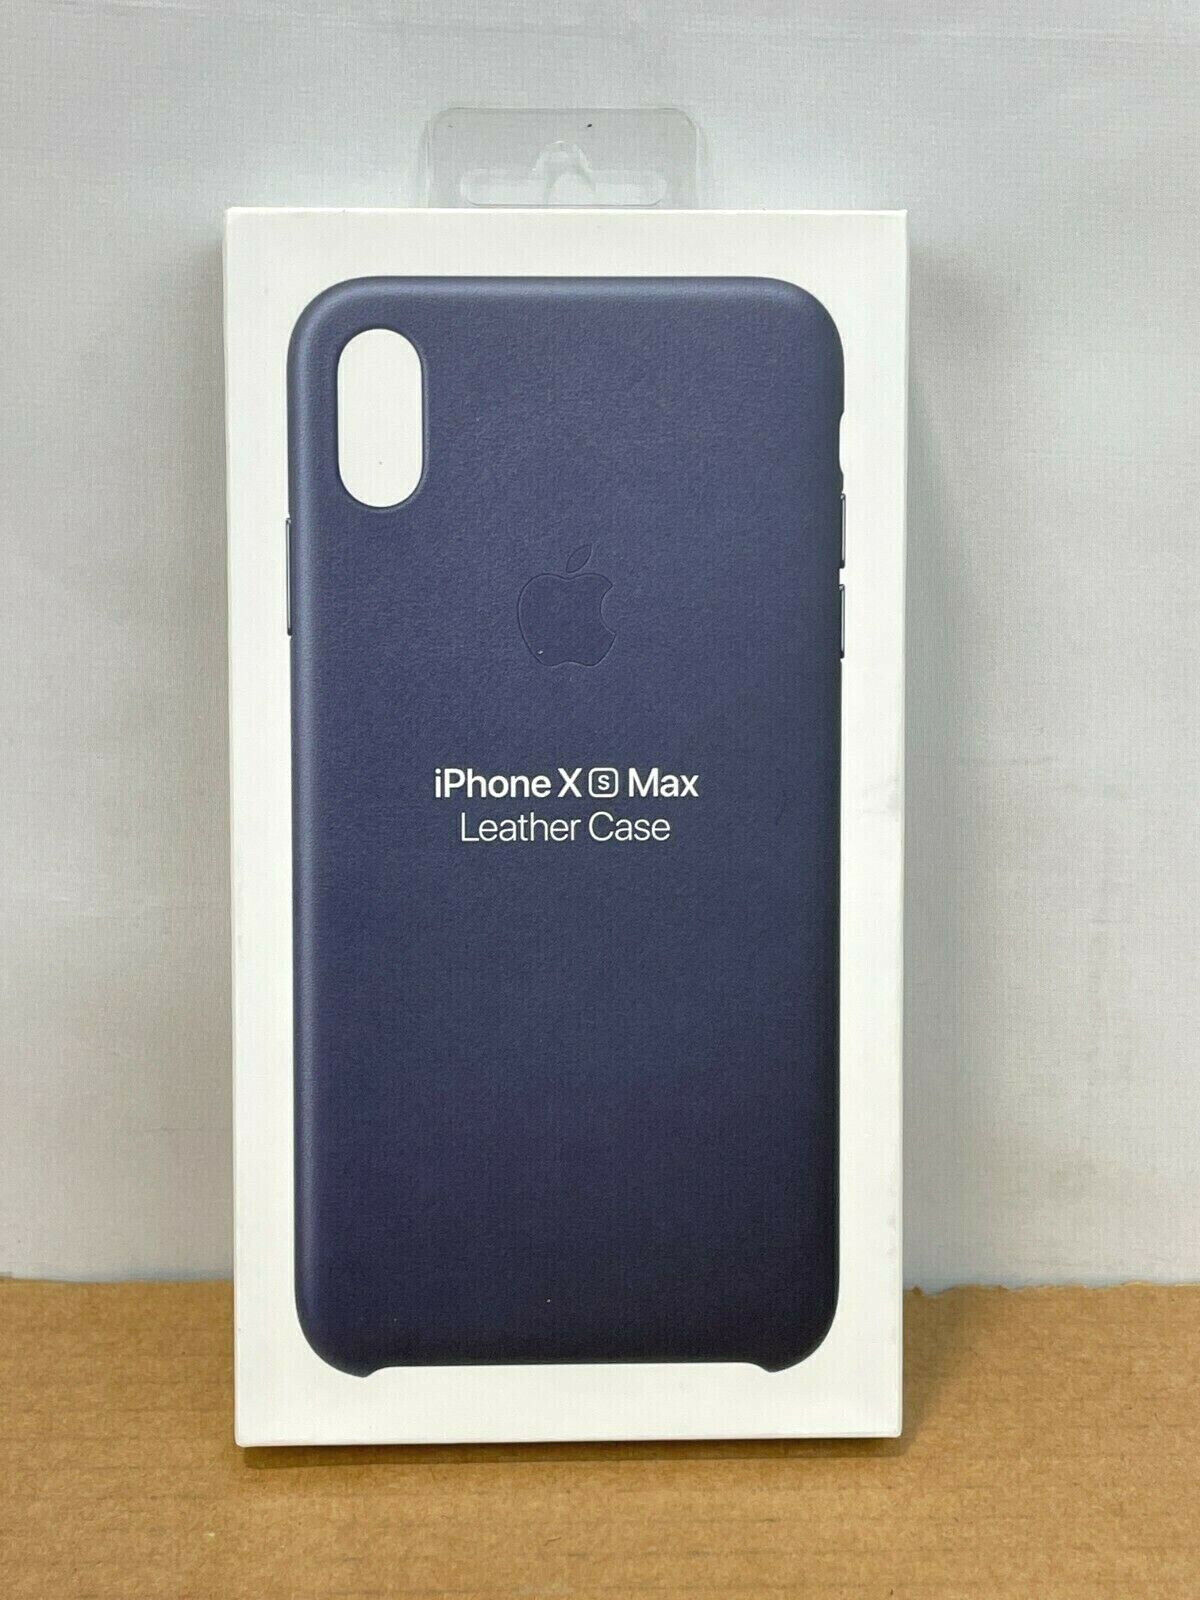 BRAND NEW Apple iPhone Xs Max Midnight Blue Leather Case MRWU2ZM/A ❤️✅❤️️ - $17.75